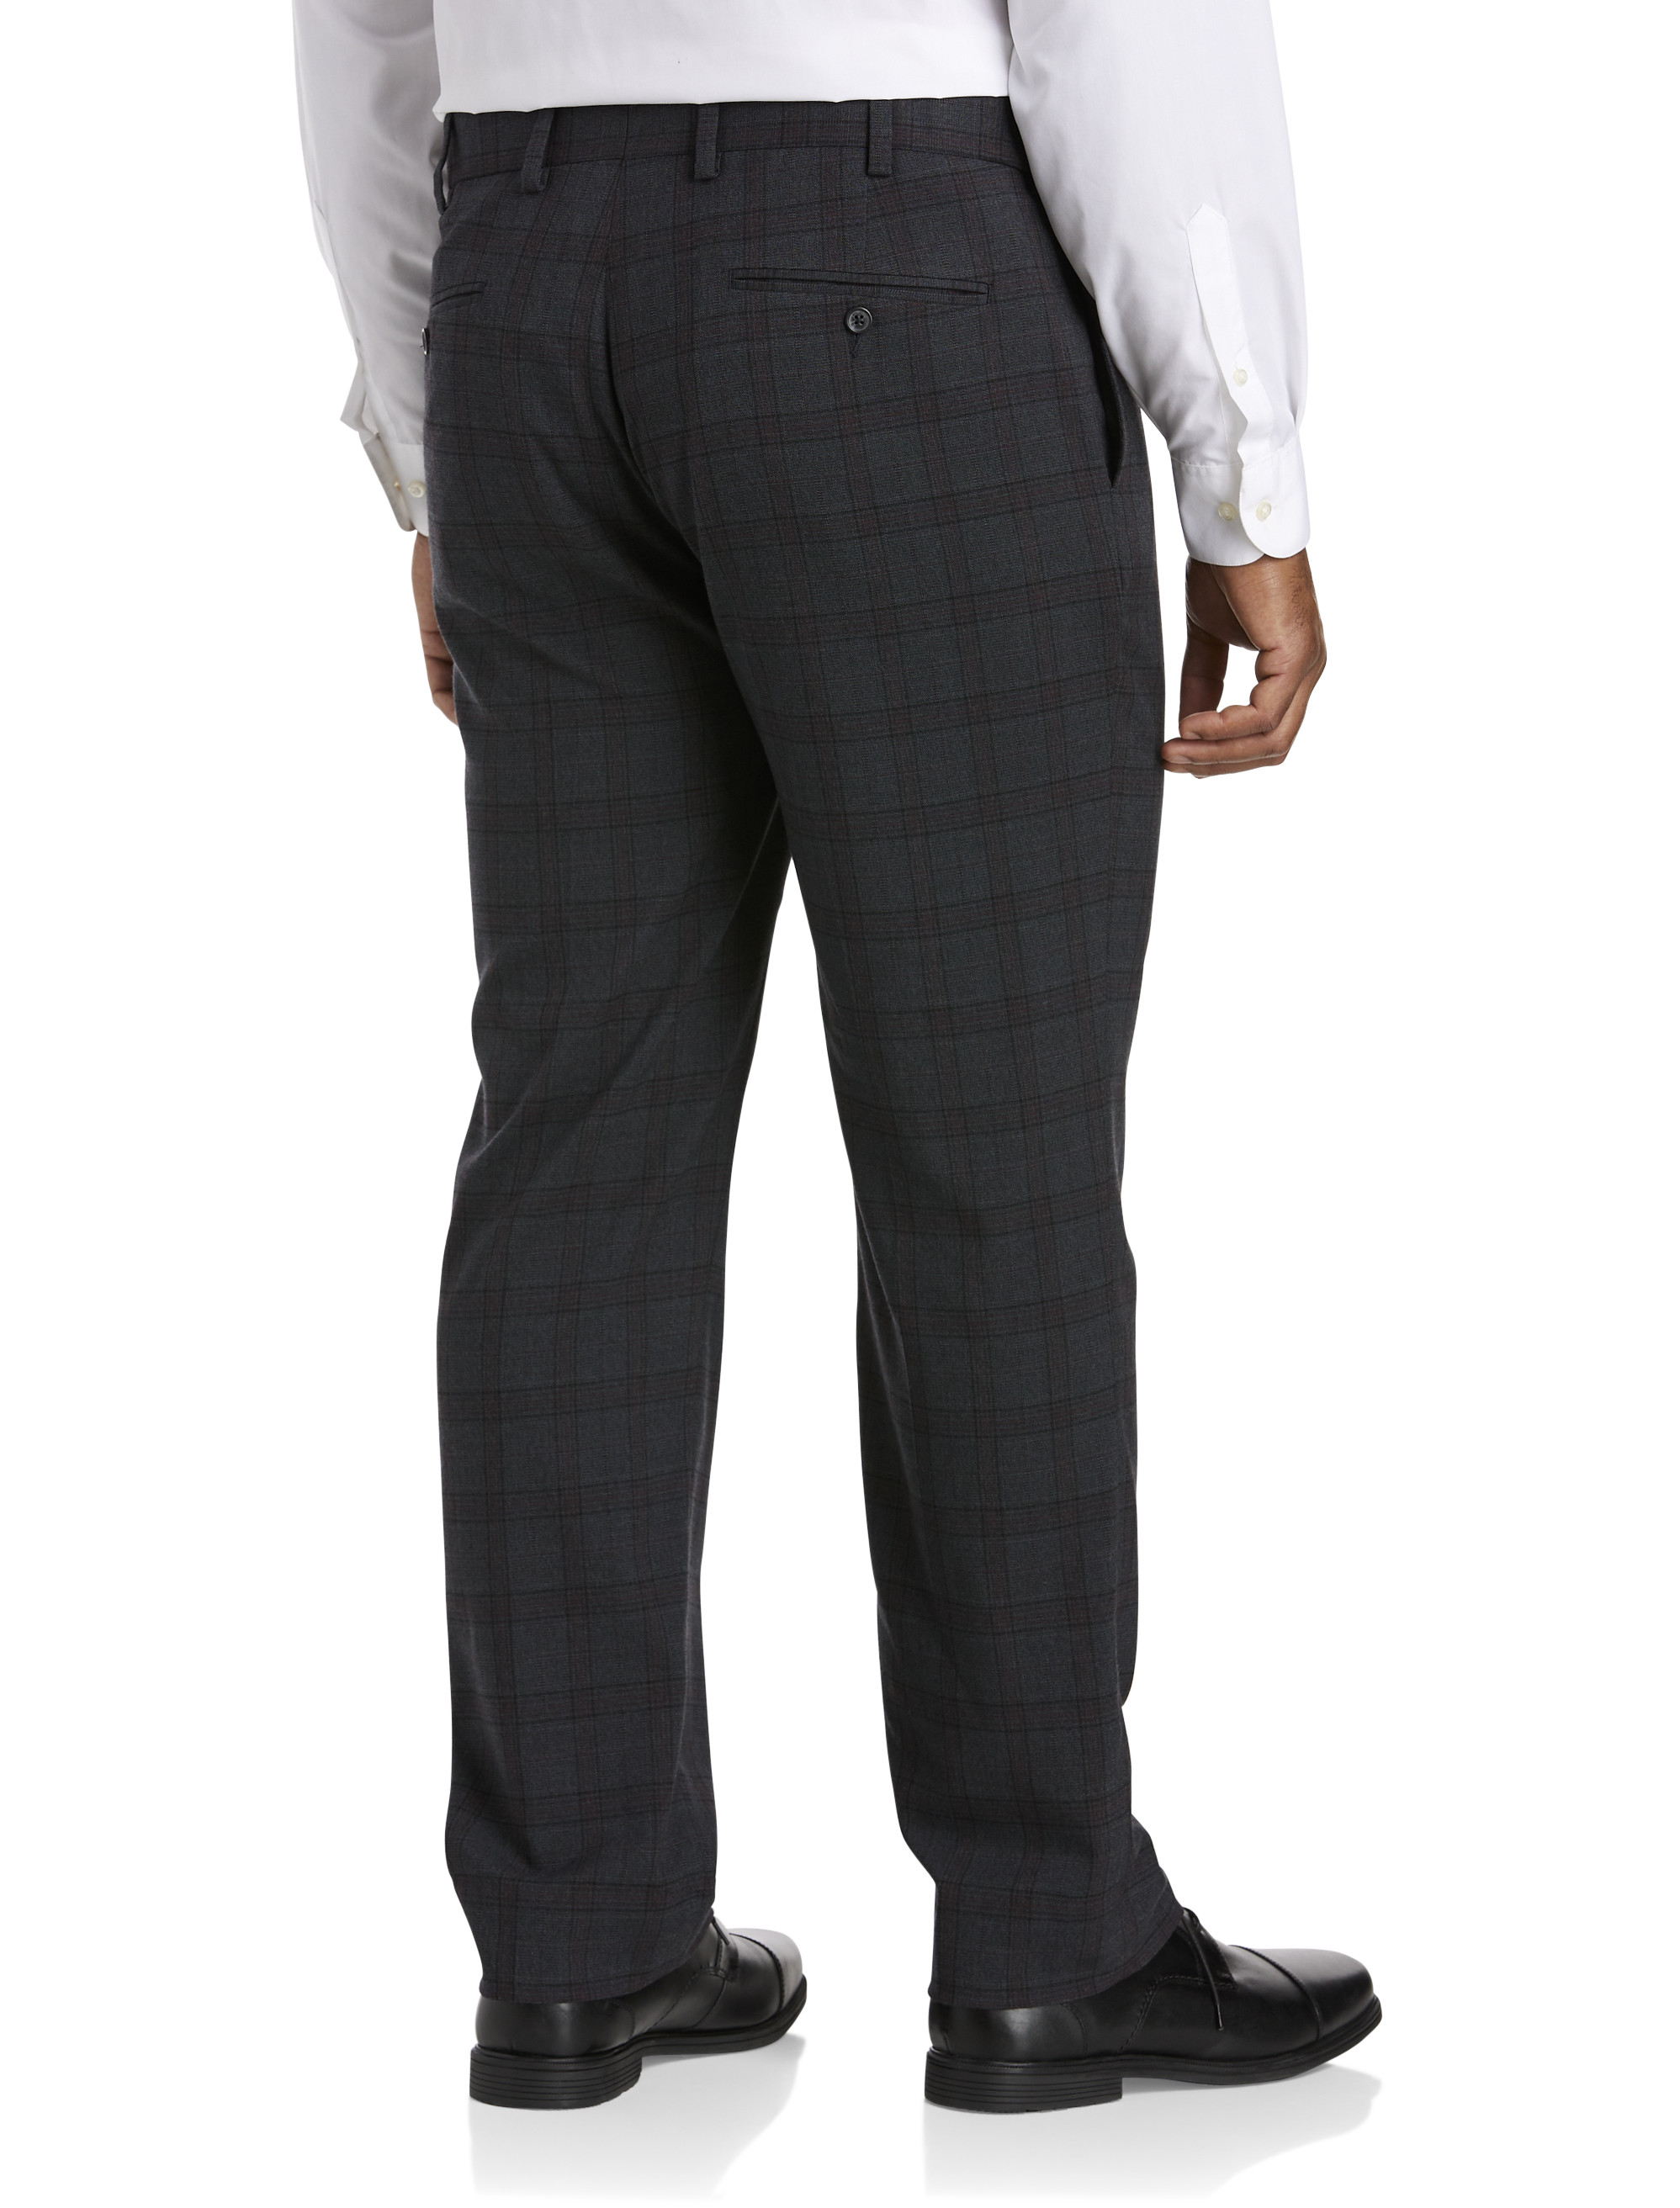 Mens Solid Navy Slim Fit Flat Front 4 Way Stretch Dress Pants